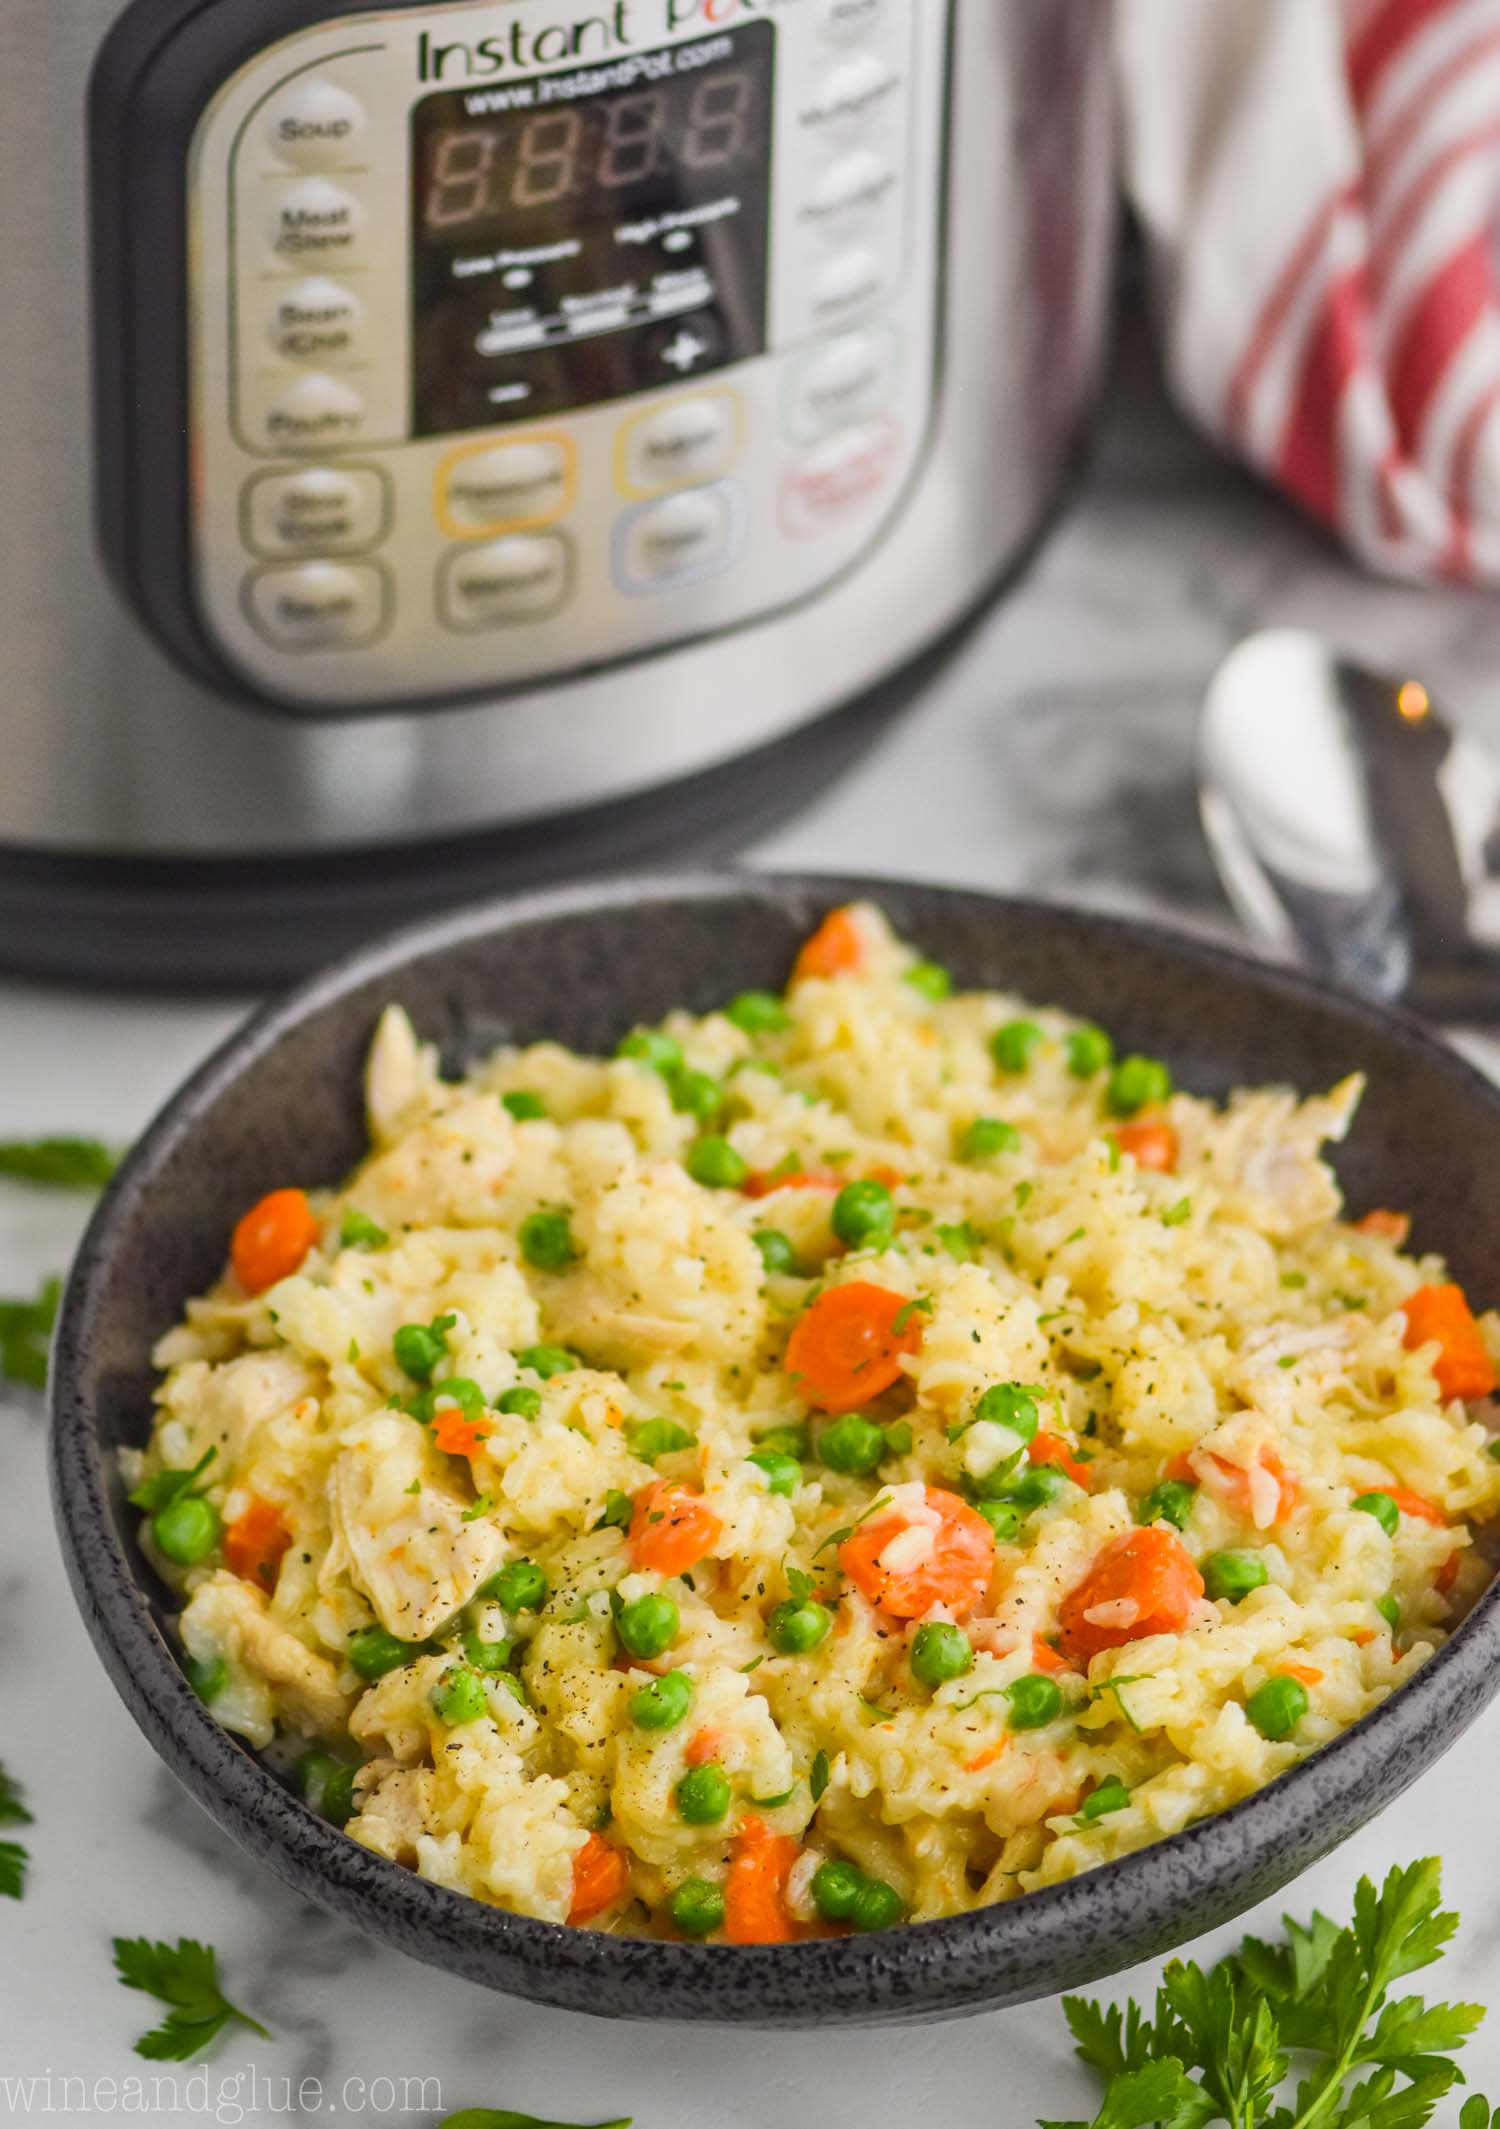 Instant Pot Chicken And Rice Recipes
 Instant Pot Chicken and Rice Casserole from scratch with